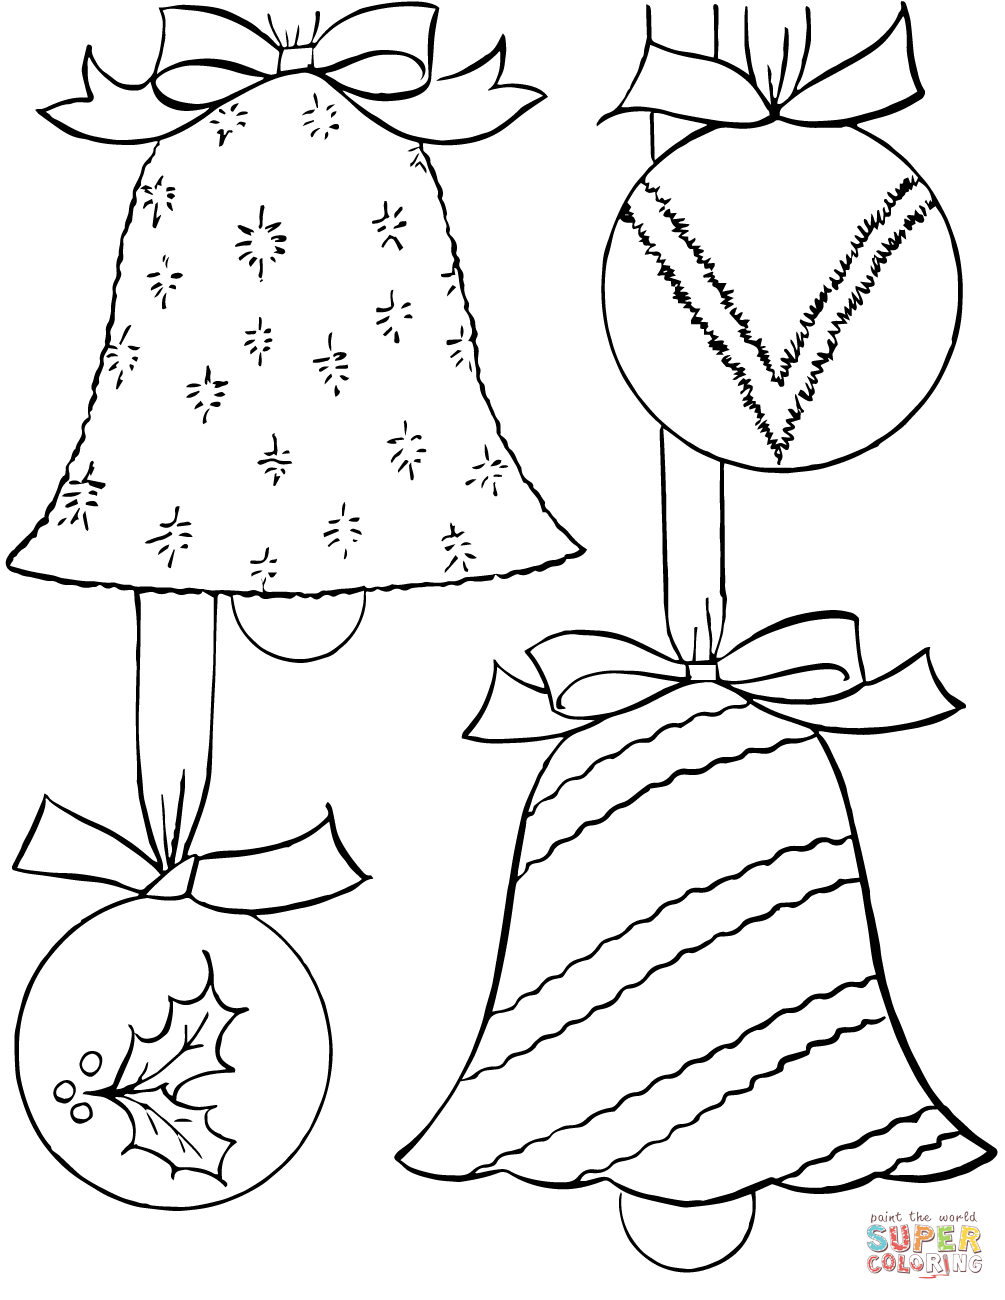 Christmas Ornaments Coloring Page | Free Printable Coloring Pages - Free Printable Ornaments To Color